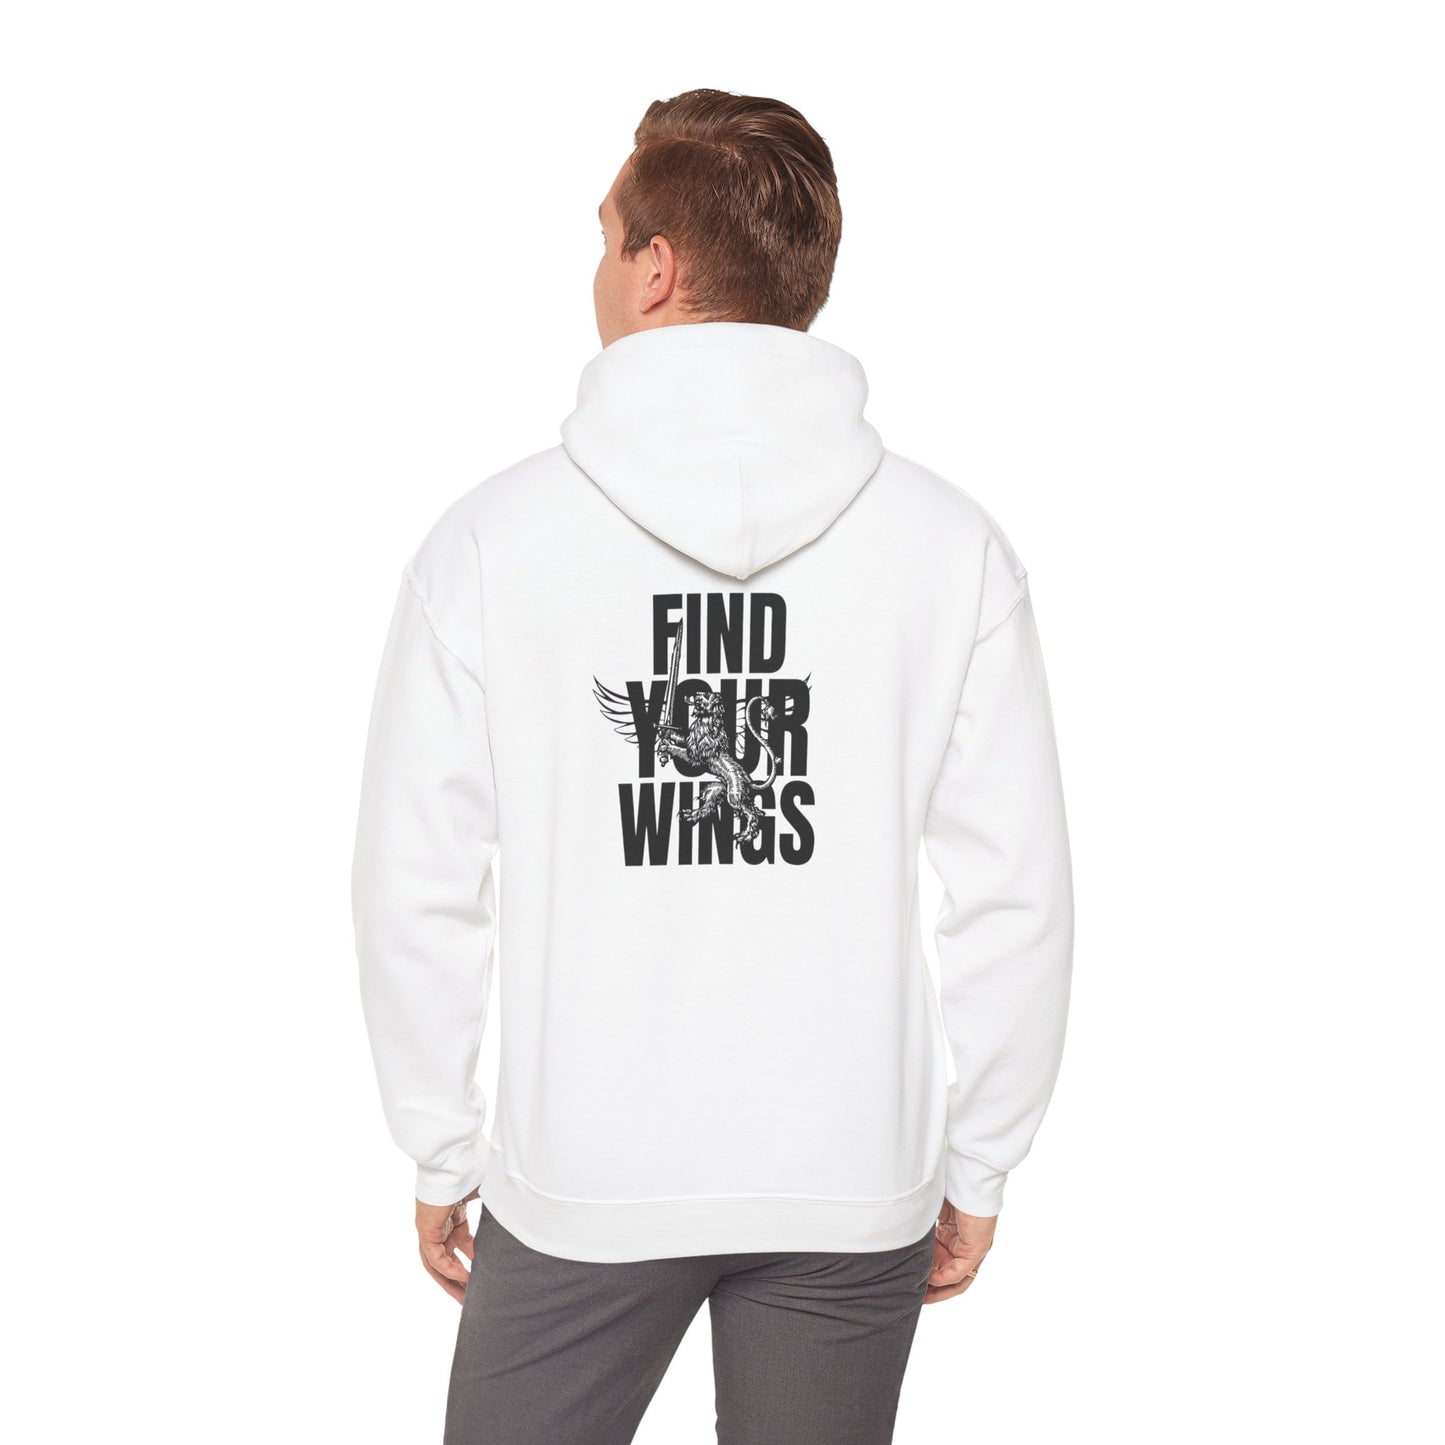 "Find Your Wings" Graphic Hoodie